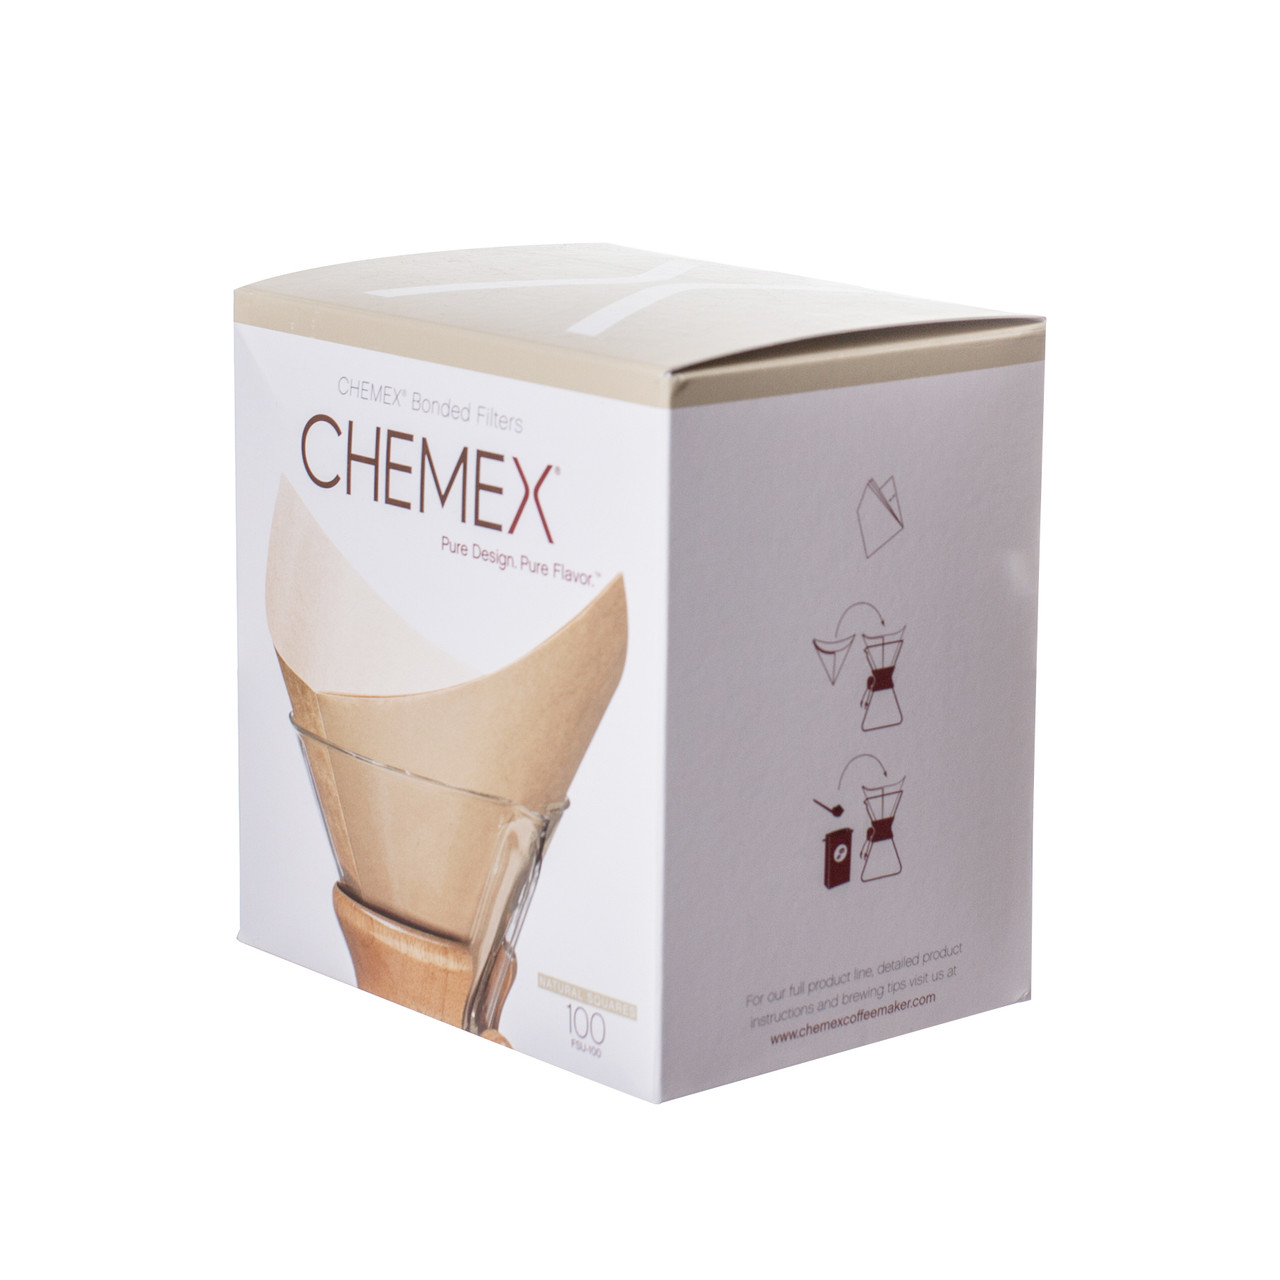 Chemex 8 Cup Coffee Maker - Classic & Glass Handle Styles